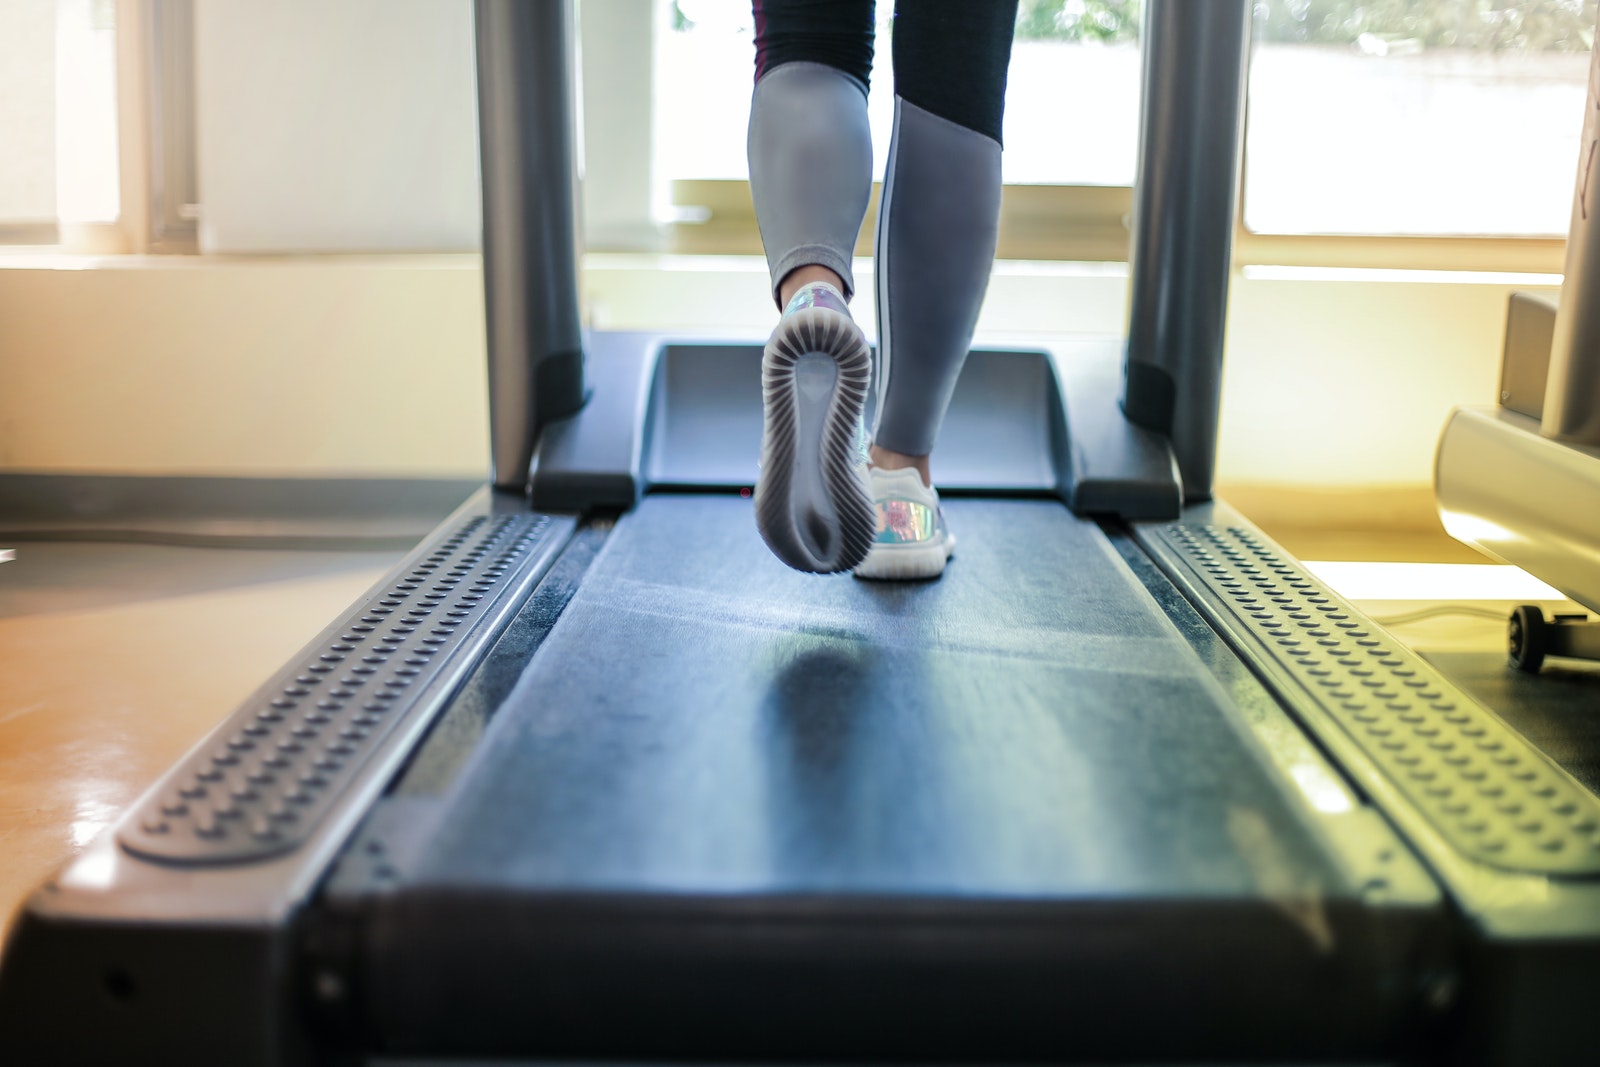 How To Run On A Treadmill? A Beginner’s Guide